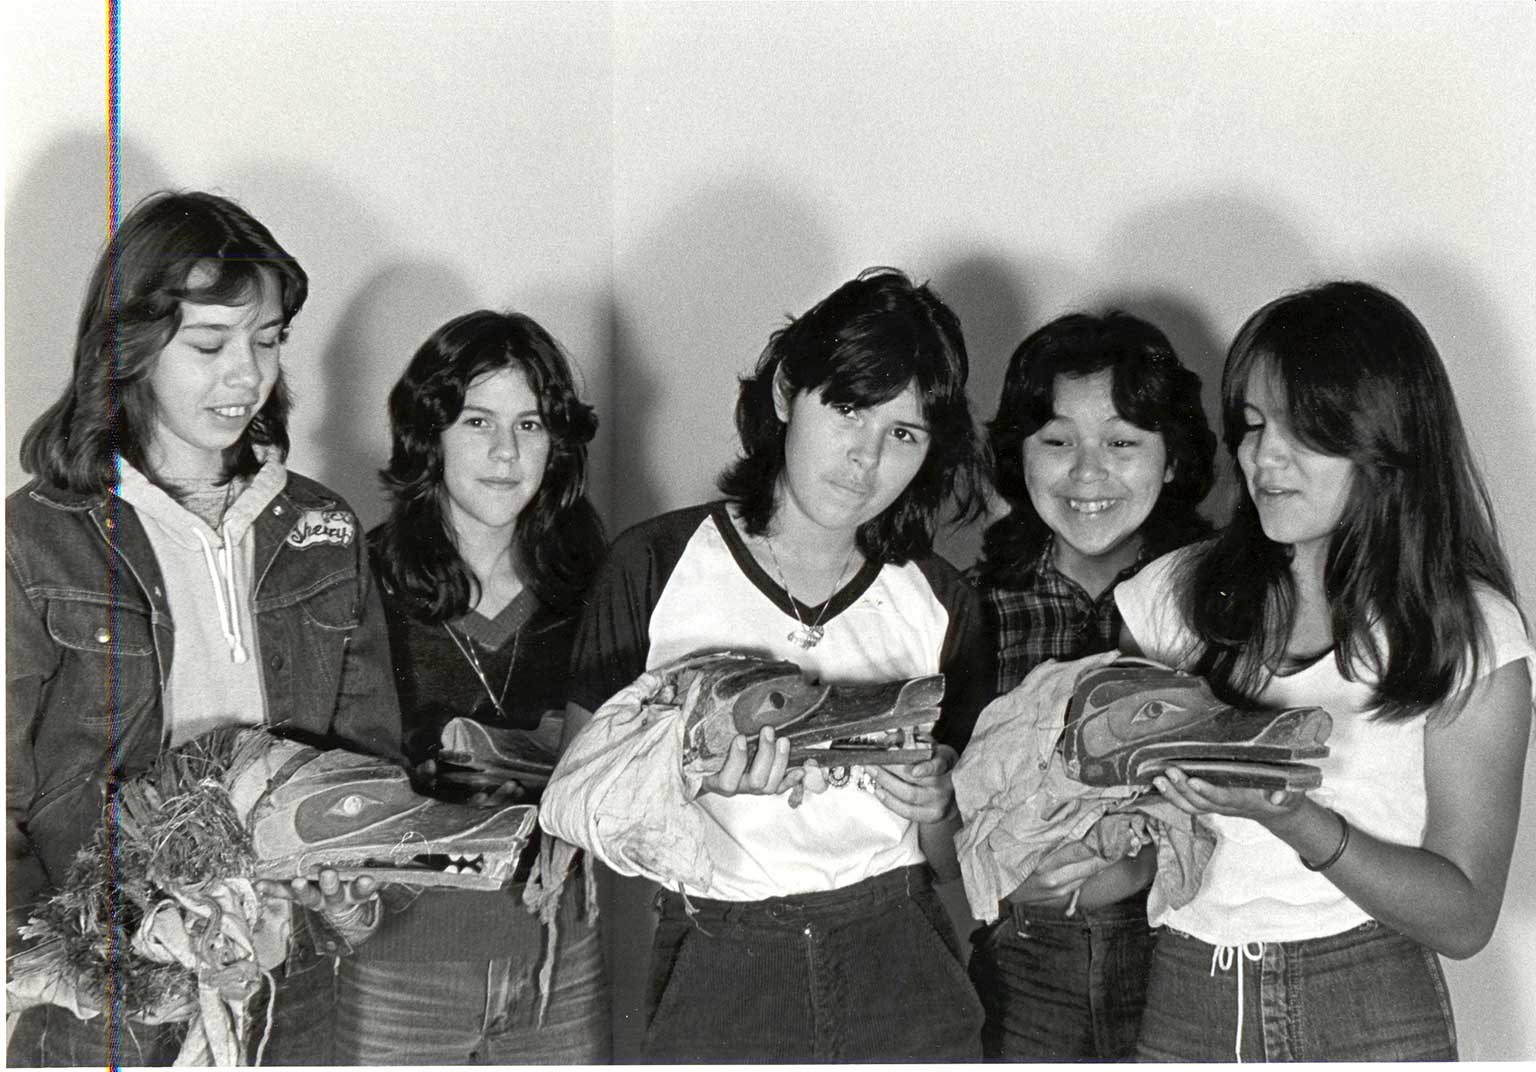 Black and white photograph of five young women in jeans and t-shirts hold 3 wolf headdresses which they observe with pride.